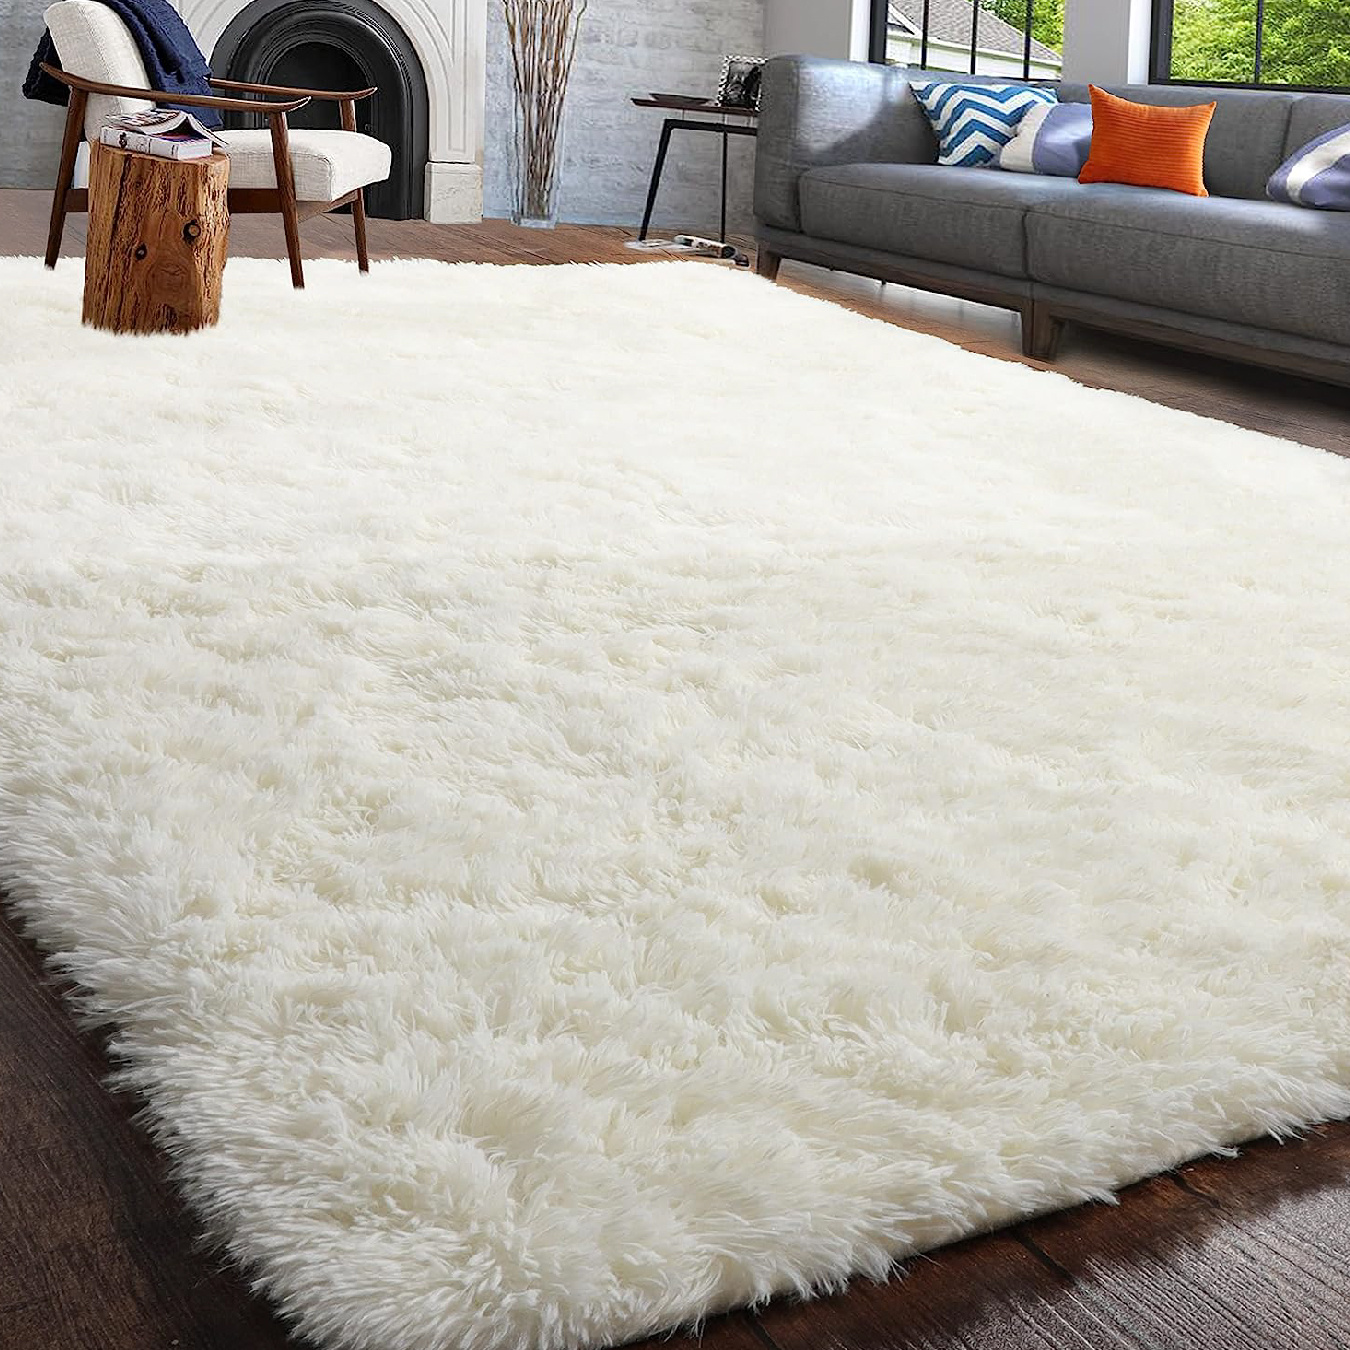 Large Area Rug 11x15 Modern Solid Shaggy Rug Soft Fluffy Indoor Rugs for  Living Room Dorm Kids Room Non-Slip Thick Floor Carpet Faux Fur Floor Cover